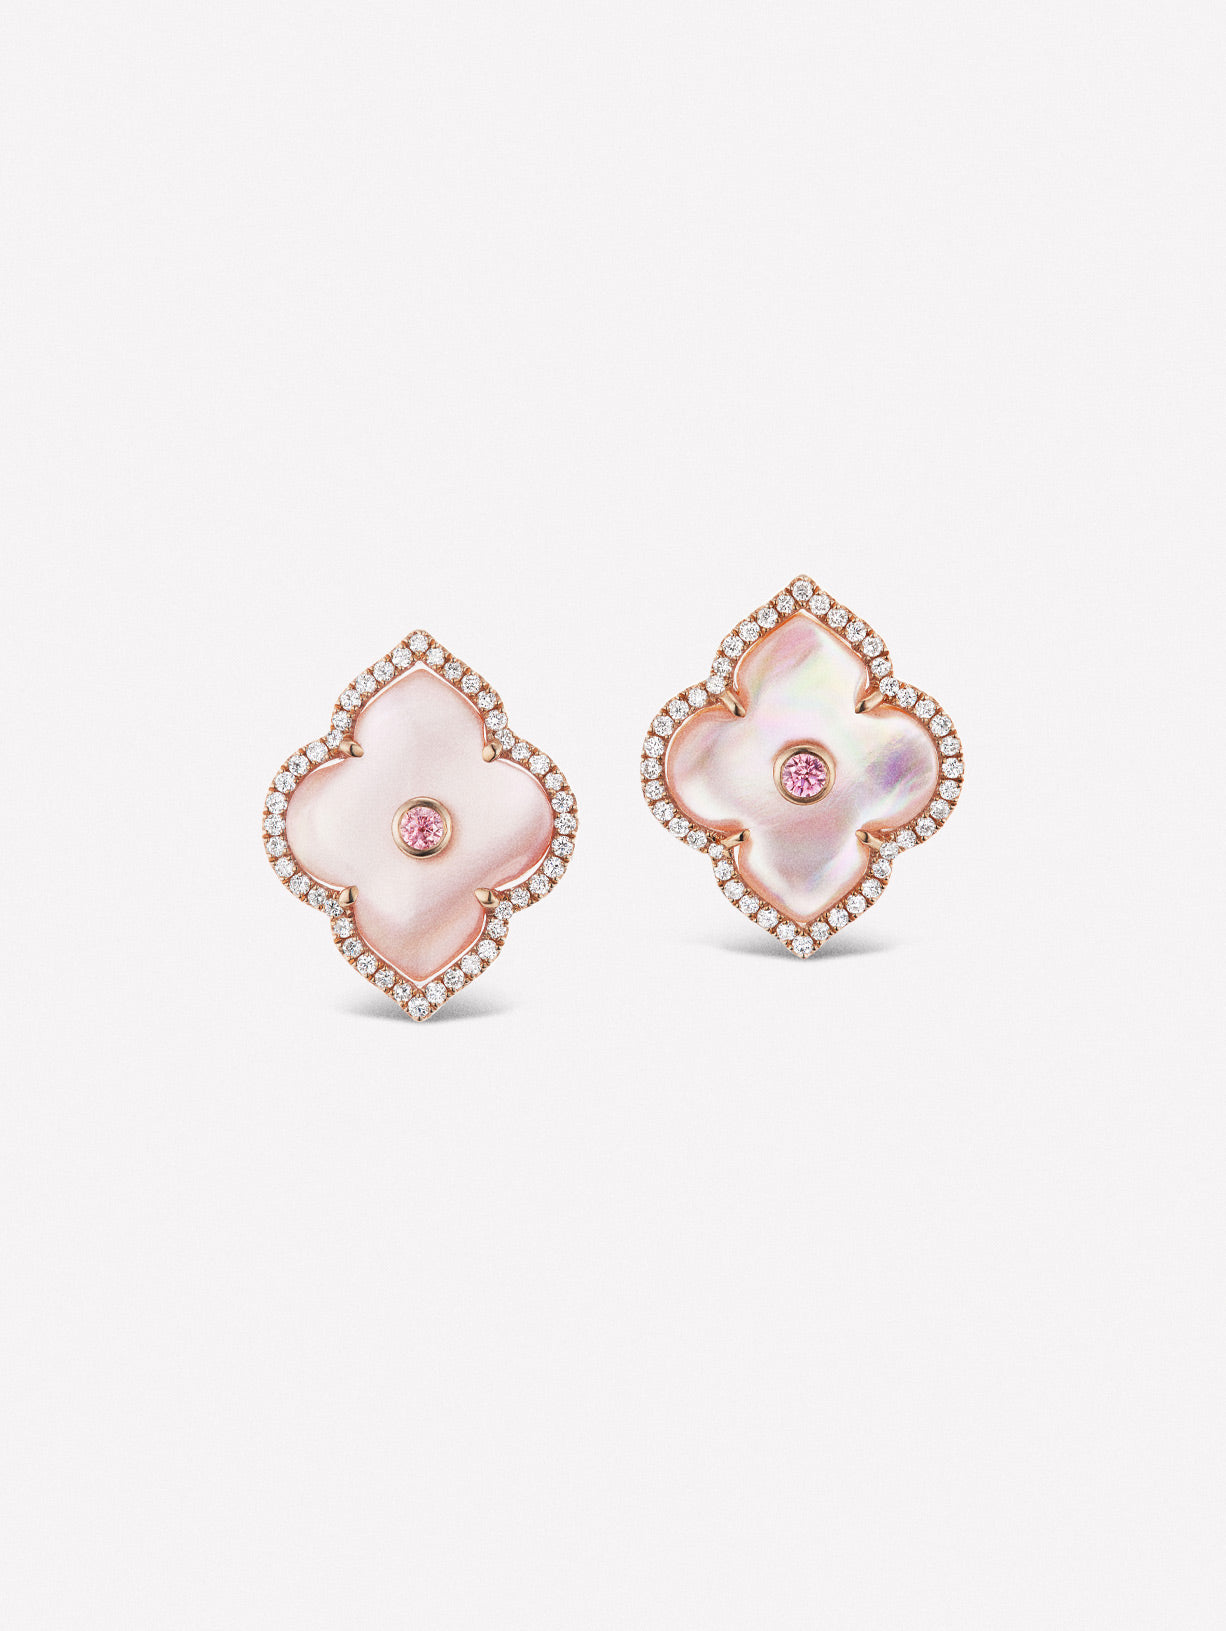 Argyle Pink™ Diamond and Mother of Pearl Studs - Pink Diamonds, J FINE - J Fine, Earrings - Pink Diamond Jewelry, argyle-pink™-diamond-and-mother-of-pearl-studs-by-j-fine - Argyle Pink Di